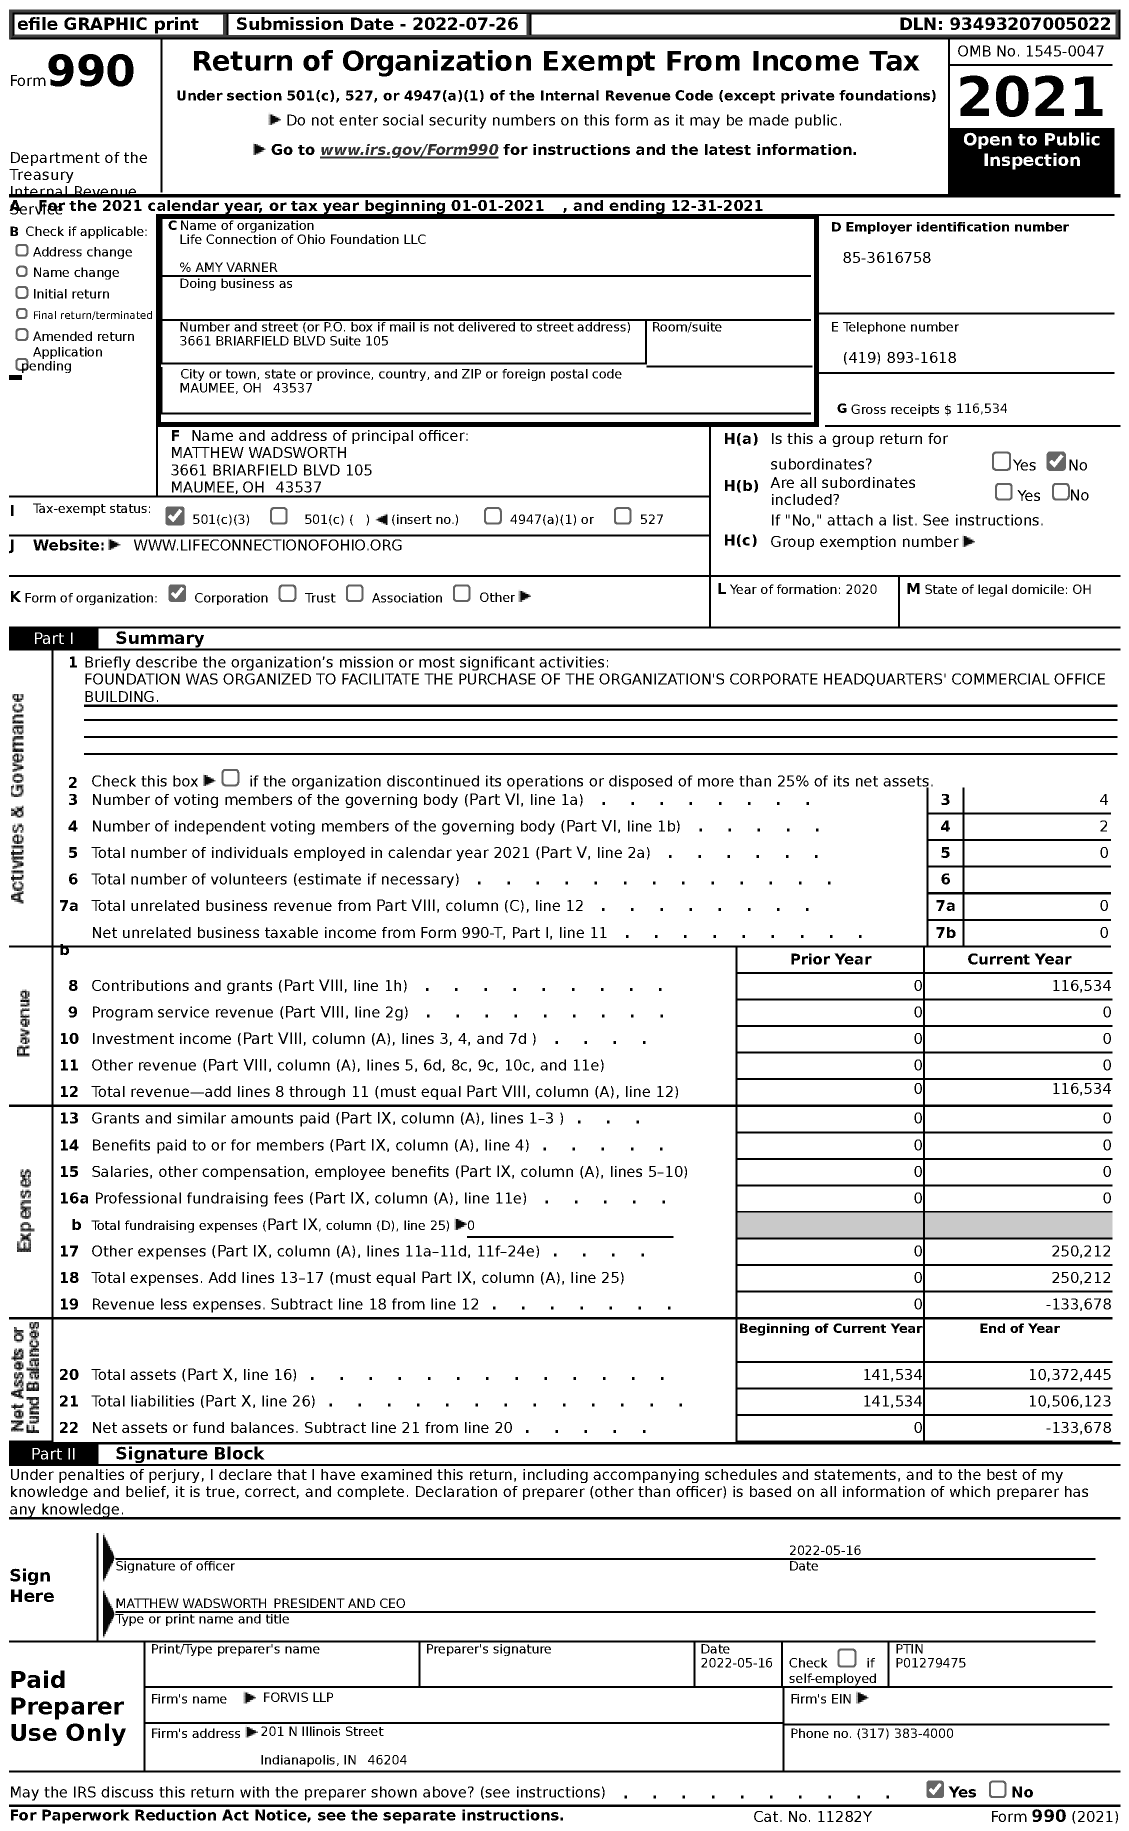 Image of first page of 2021 Form 990 for Life Connection of Ohio Foundation LLC